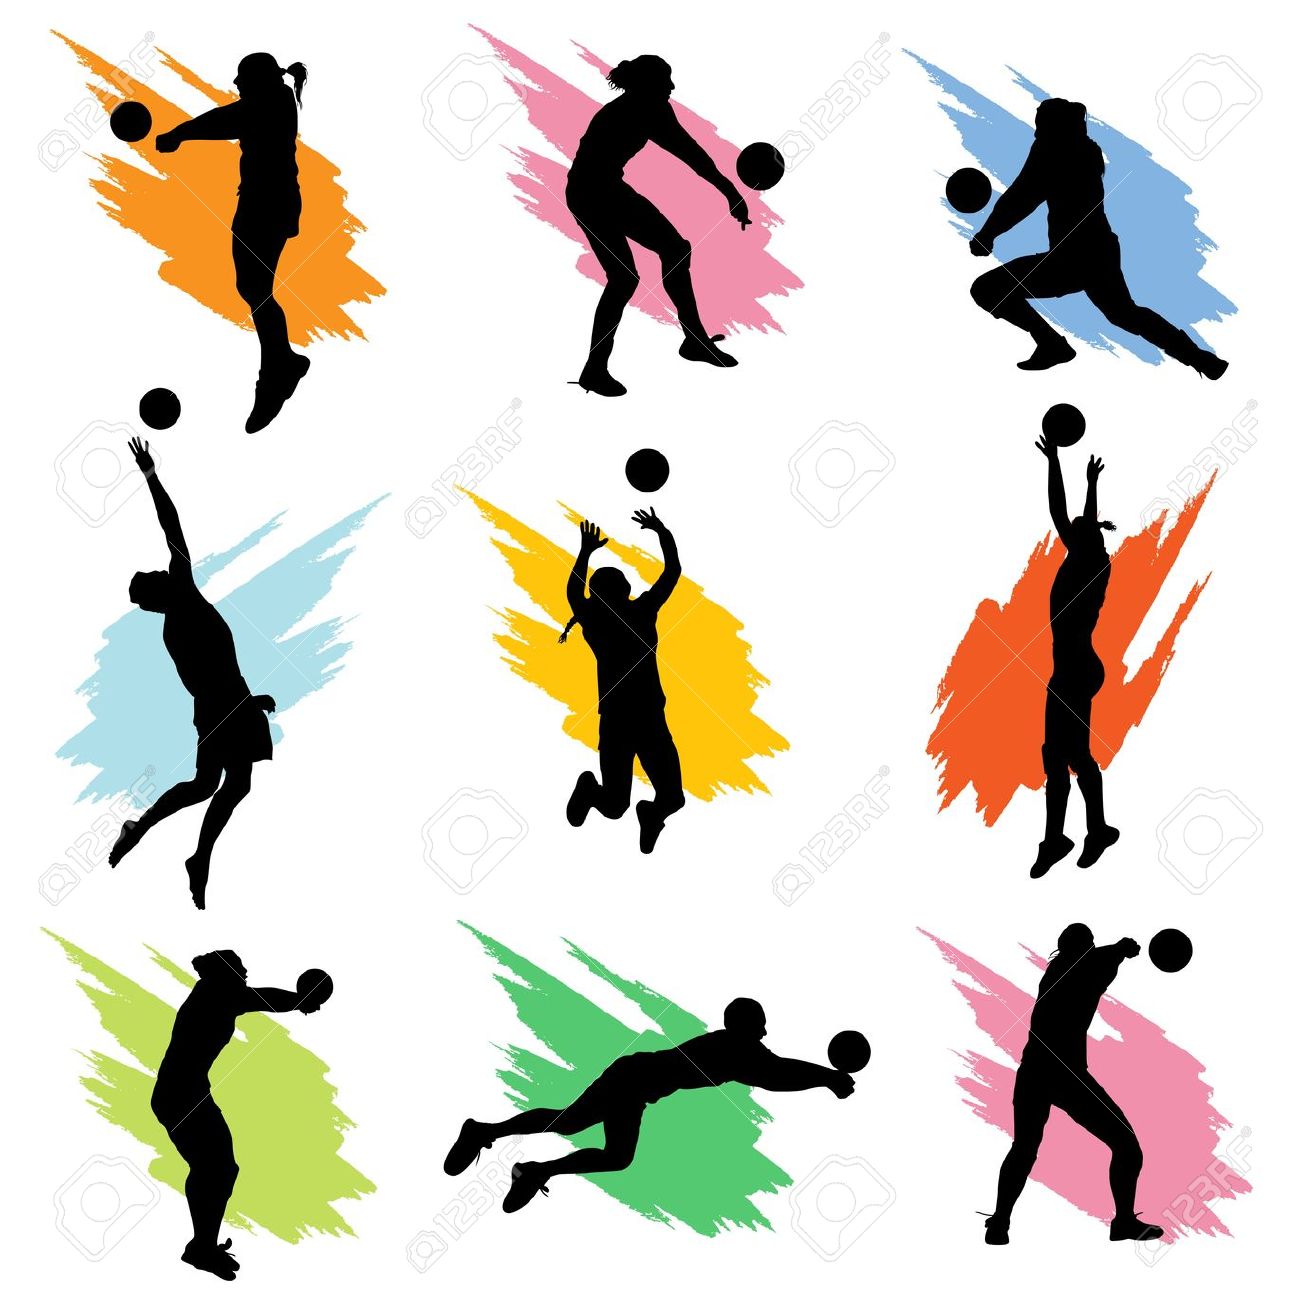 free clipart images volleyball - photo #39